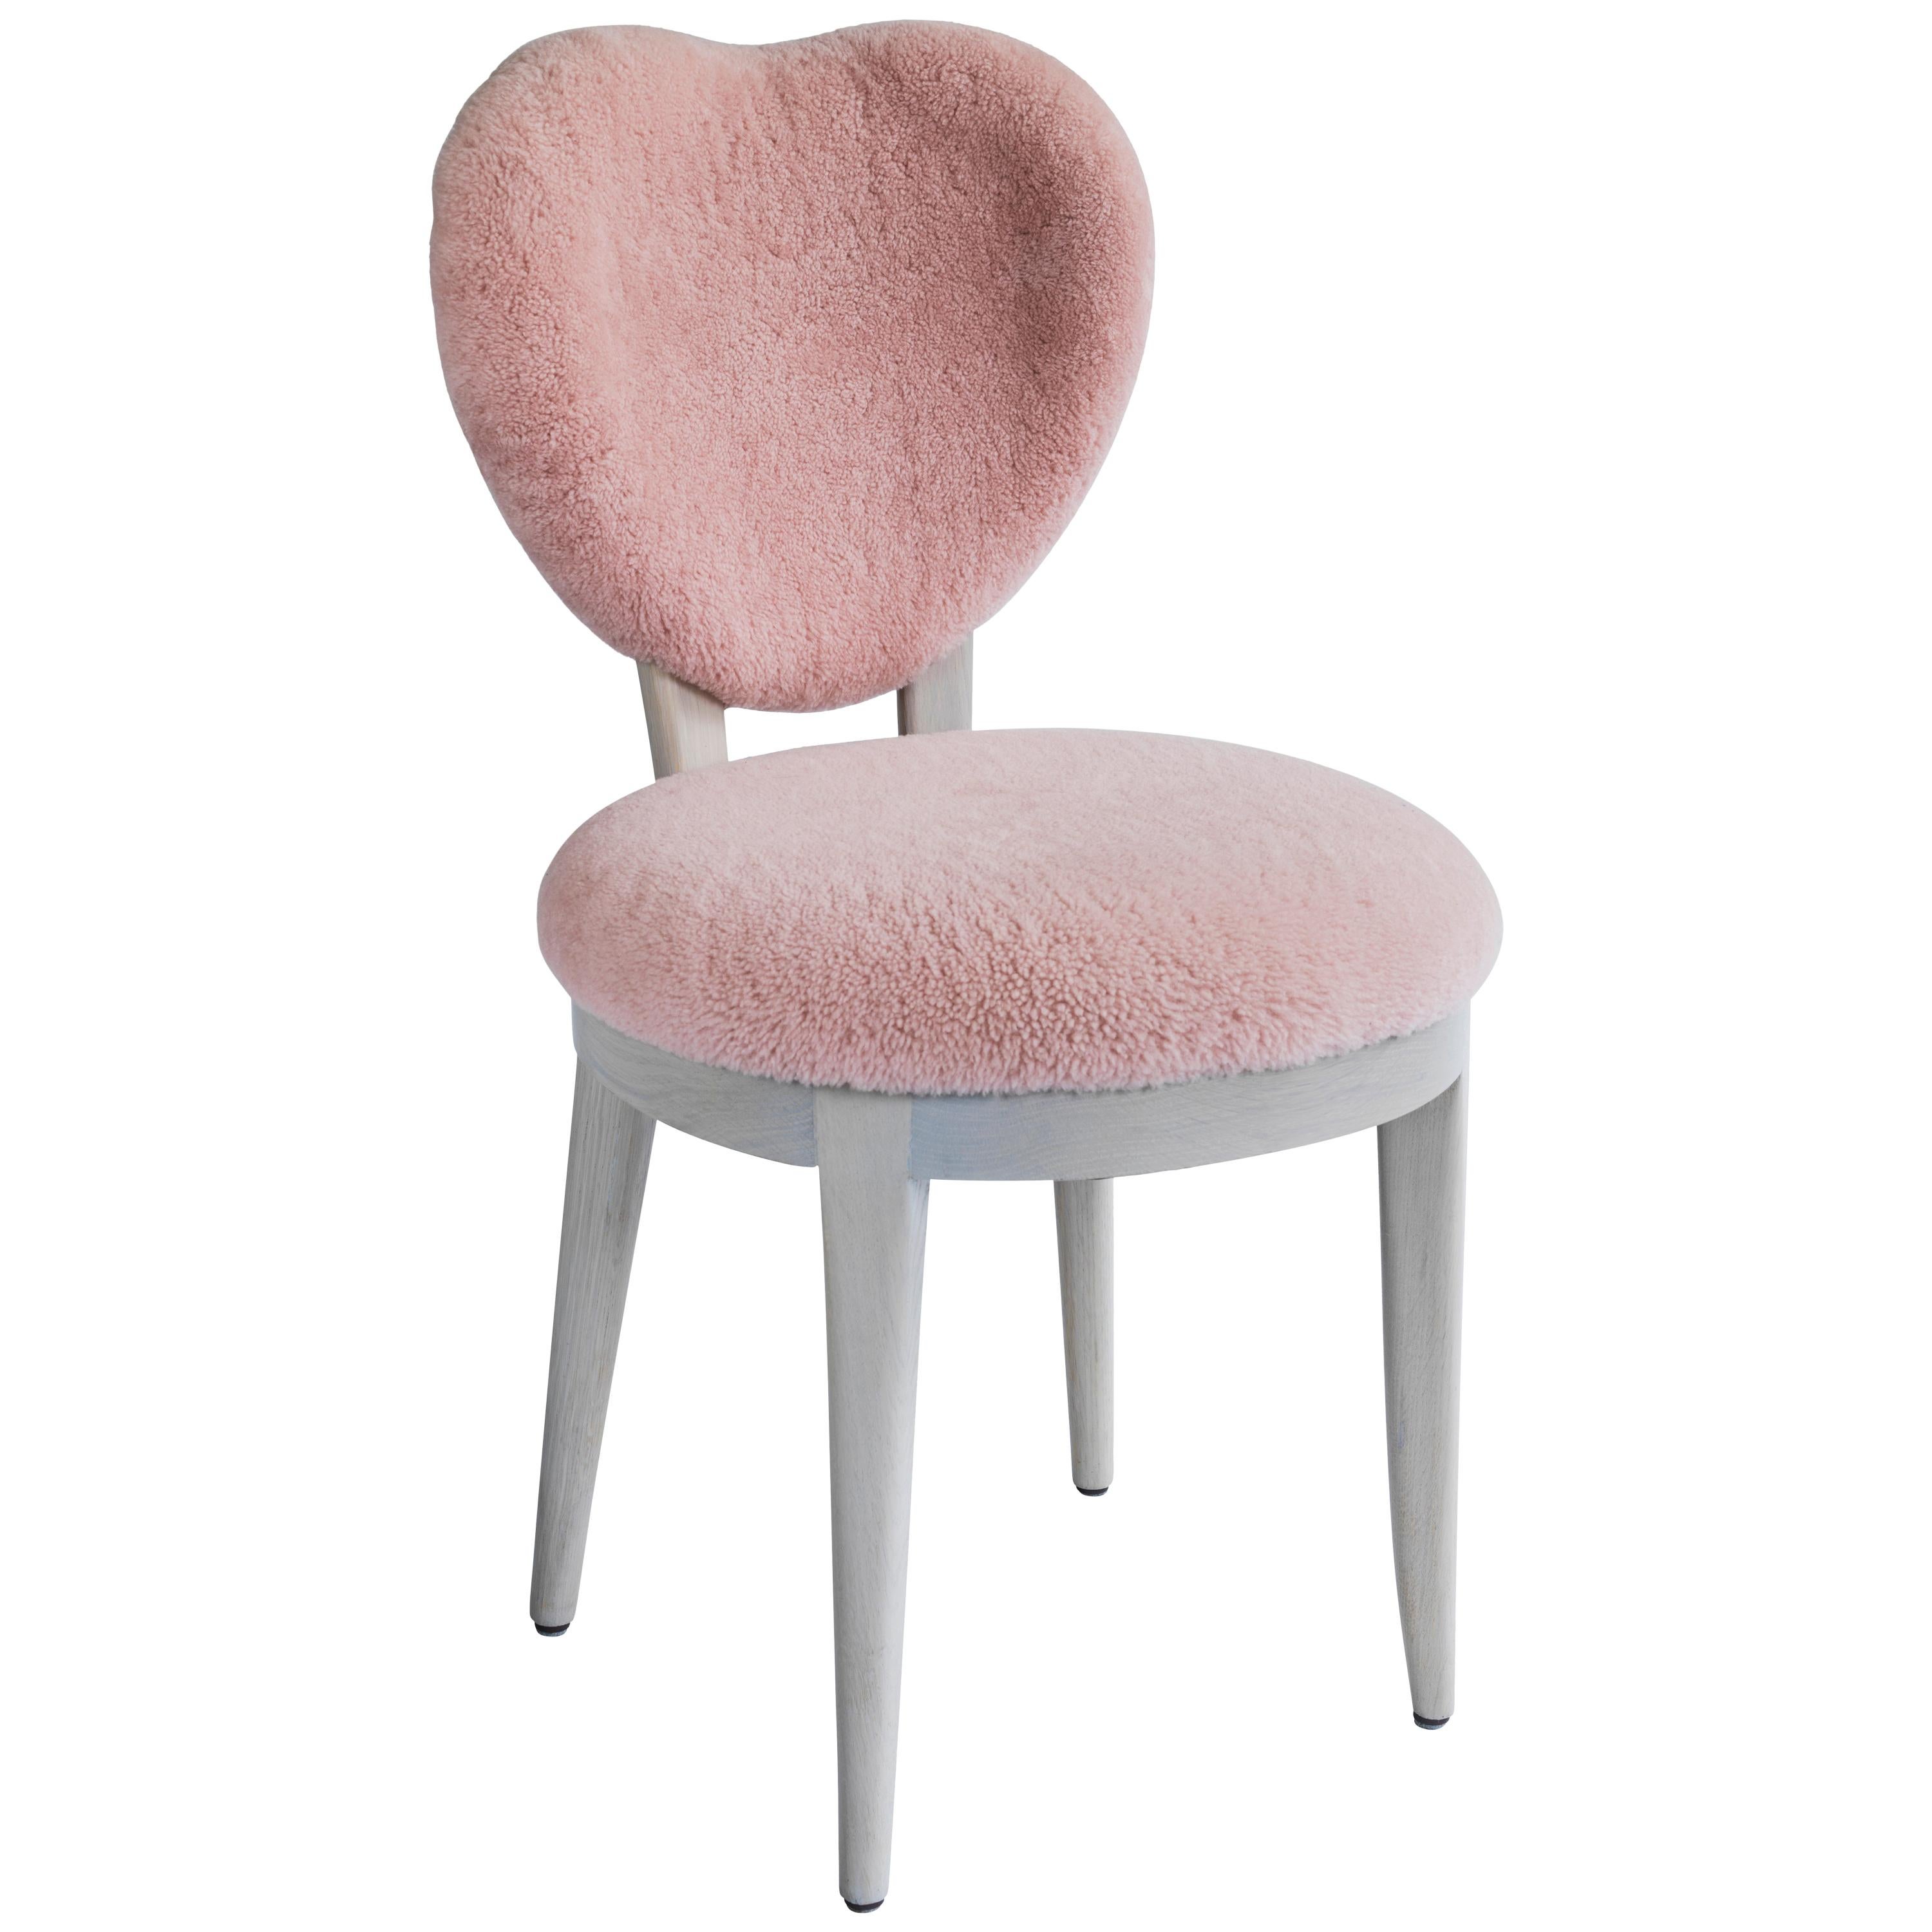 Contemporary Coy Chair Pink Sheepskin Upholstered Dining Chair or Side Chair For Sale